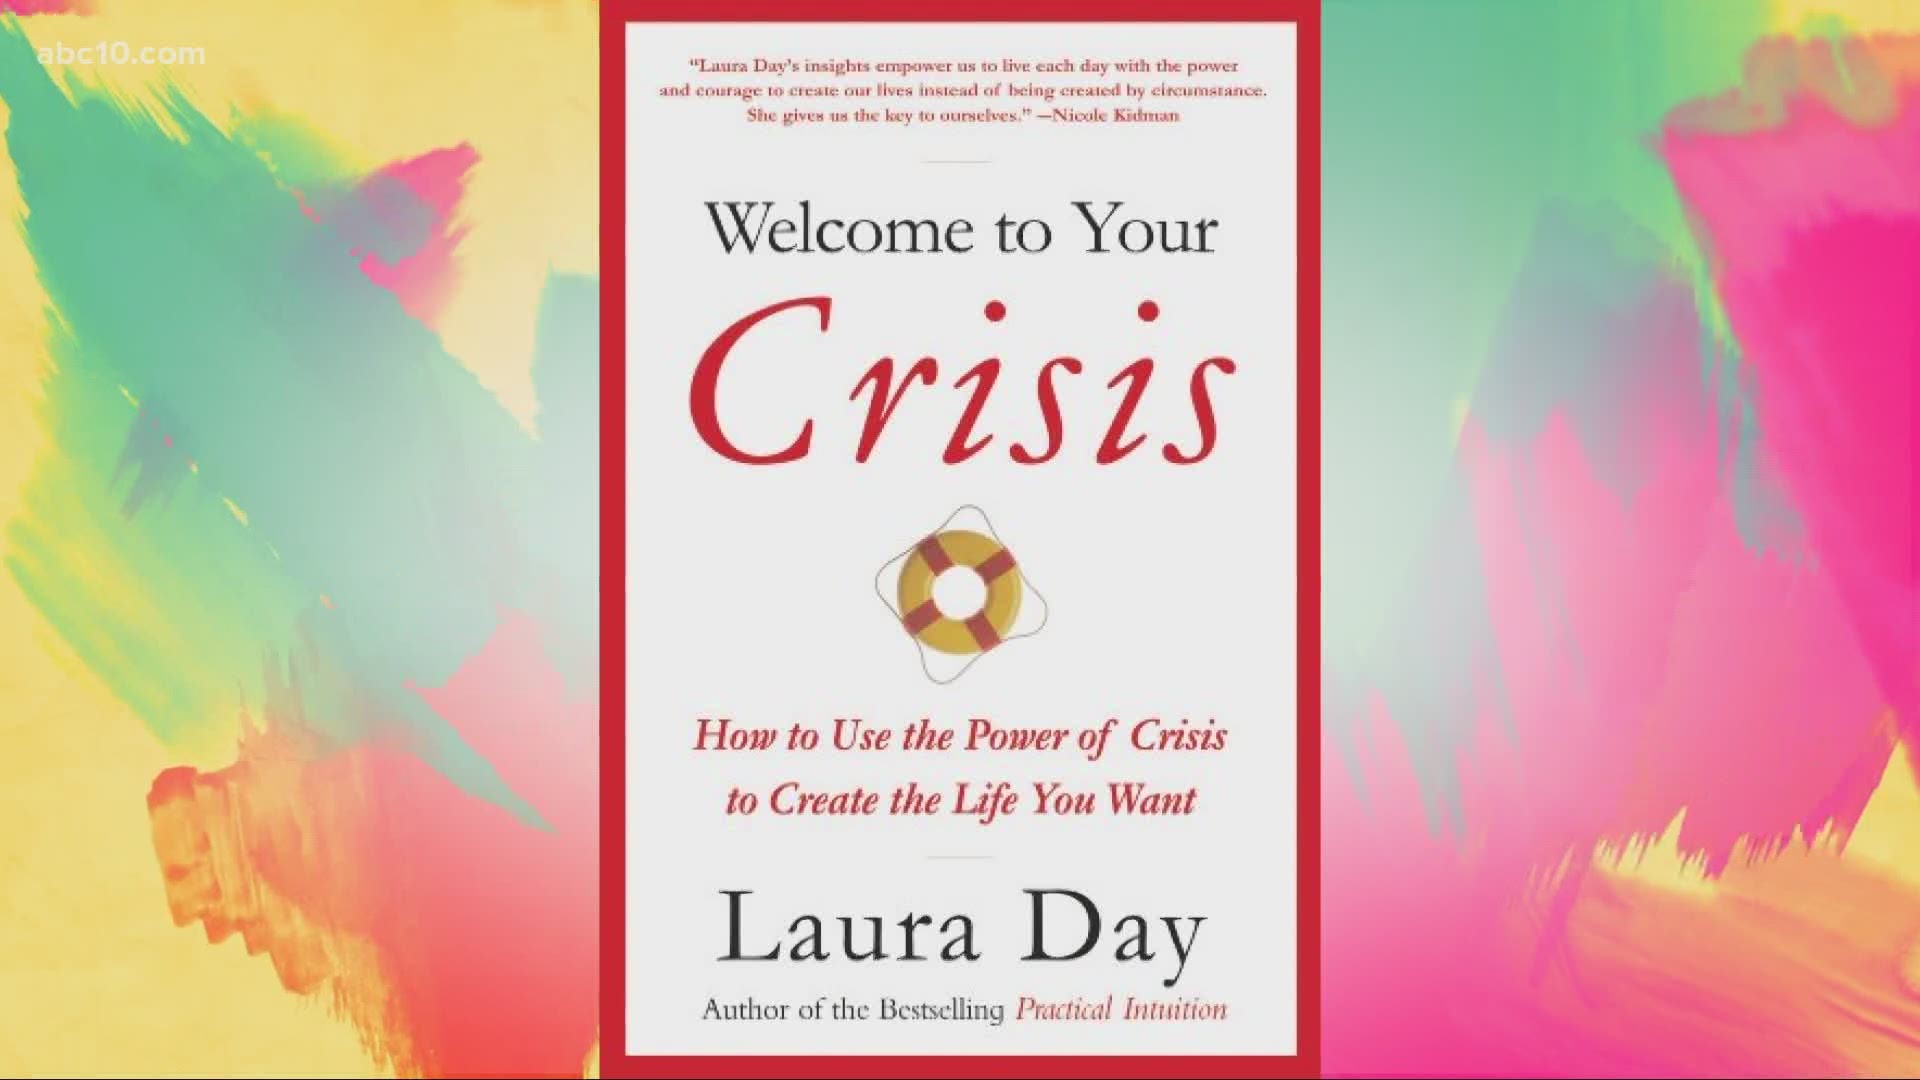 Intuitive Laura Day talks about the four different types of crisis: anger, depression, anxiety & denial, and how we can use our intuition to emerge stronger.